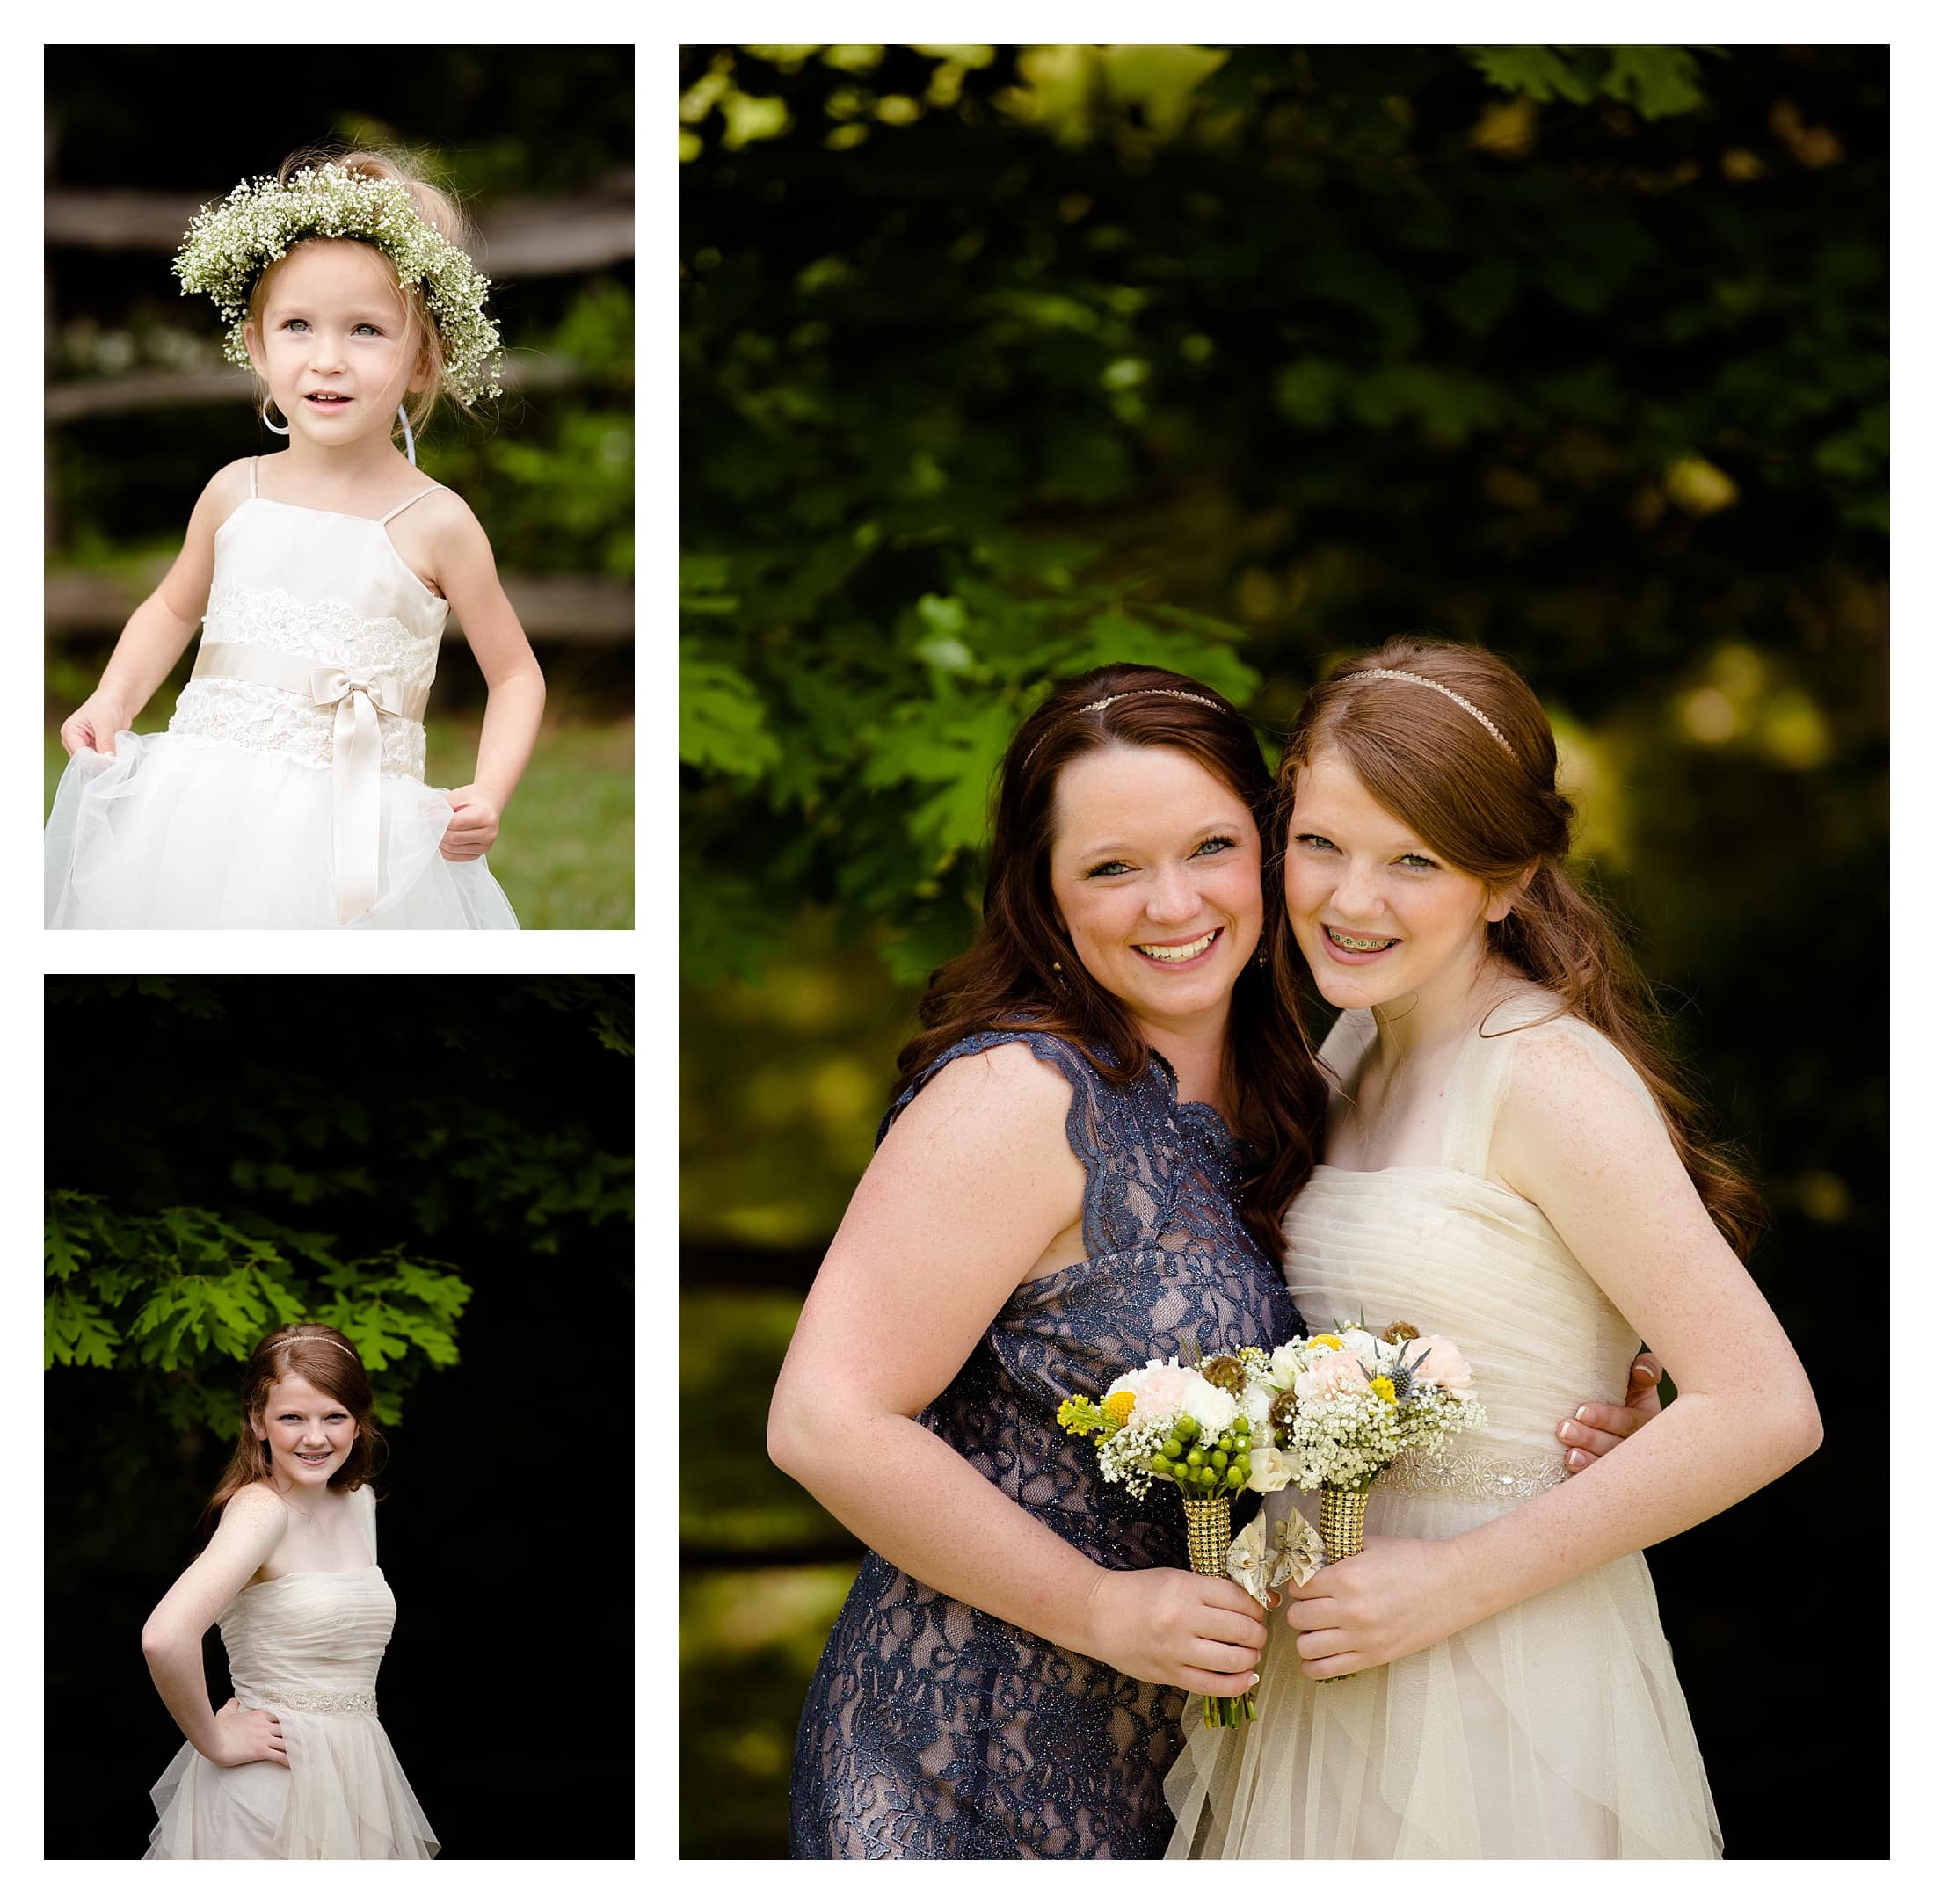 Flower girl and Bridesmaid pictures